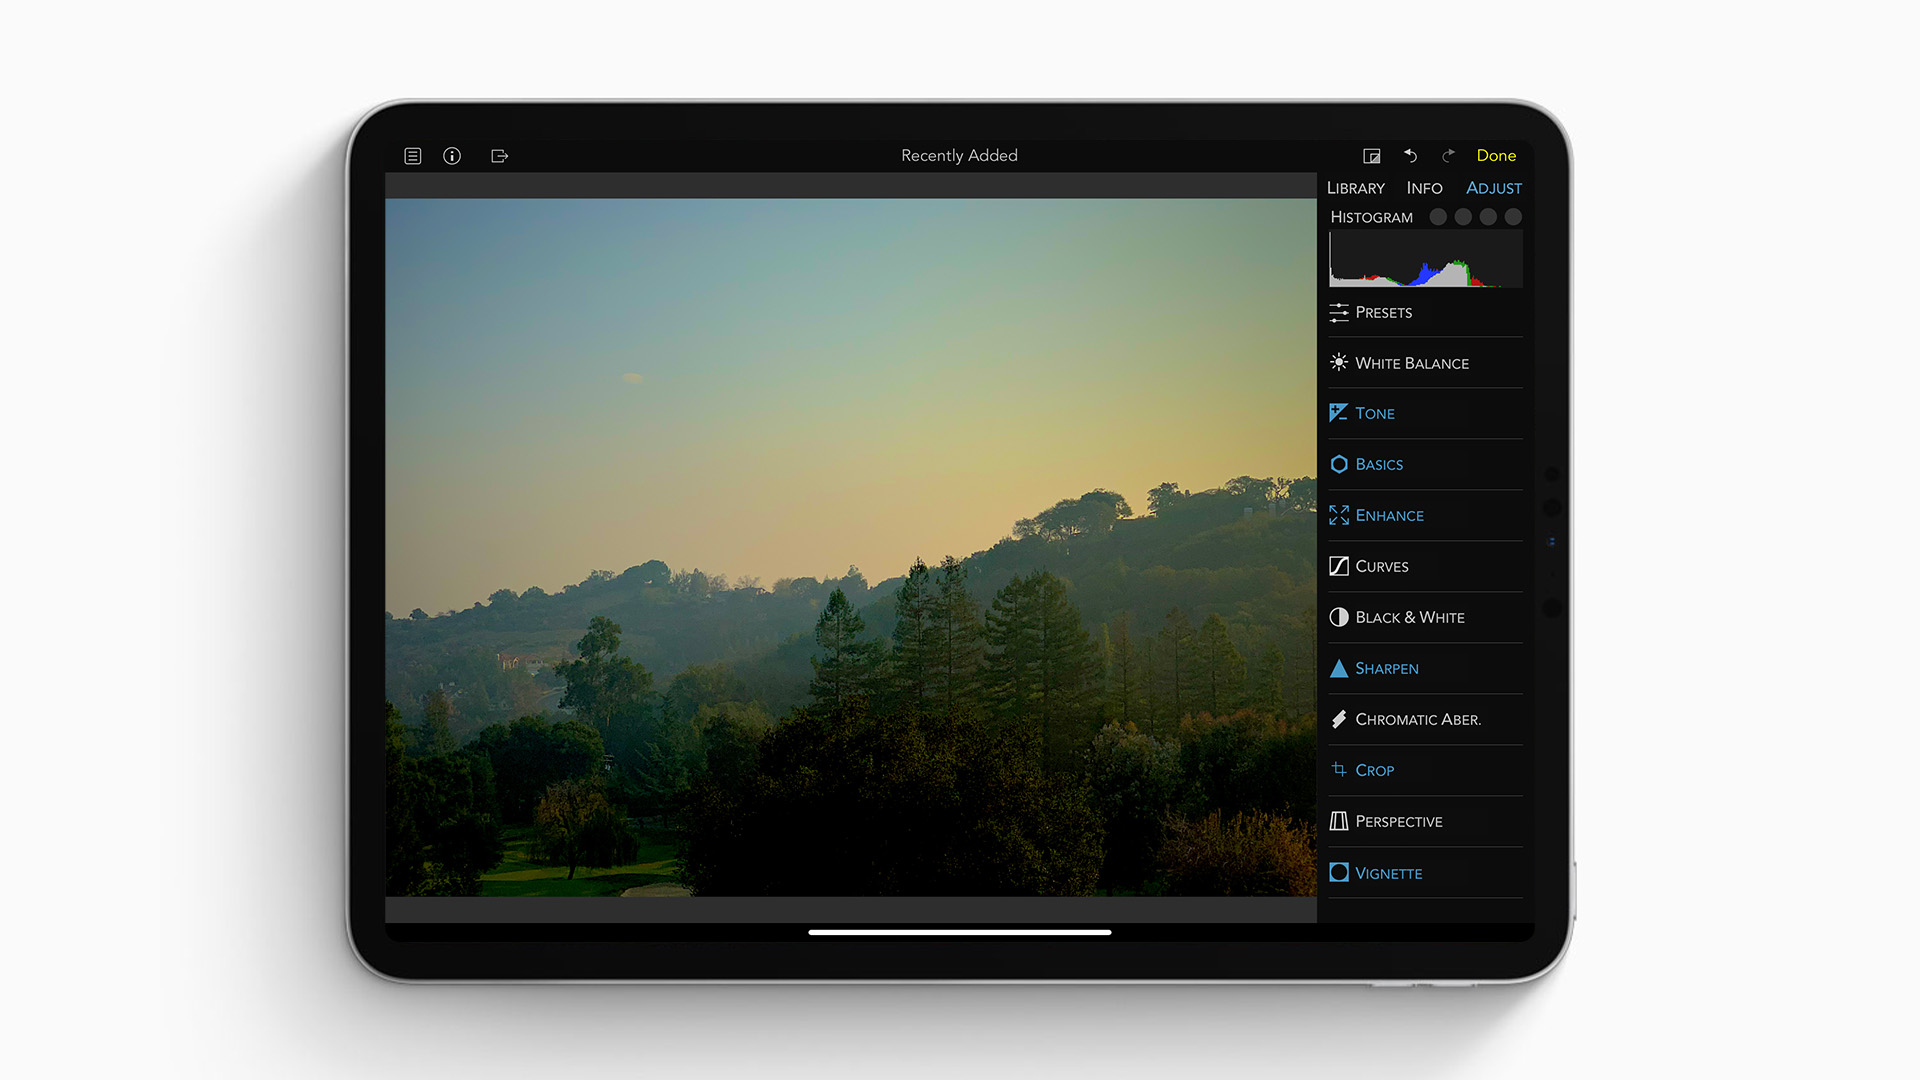  RAW  Power 2 0 photo  editor  for iOS and Mac released with 